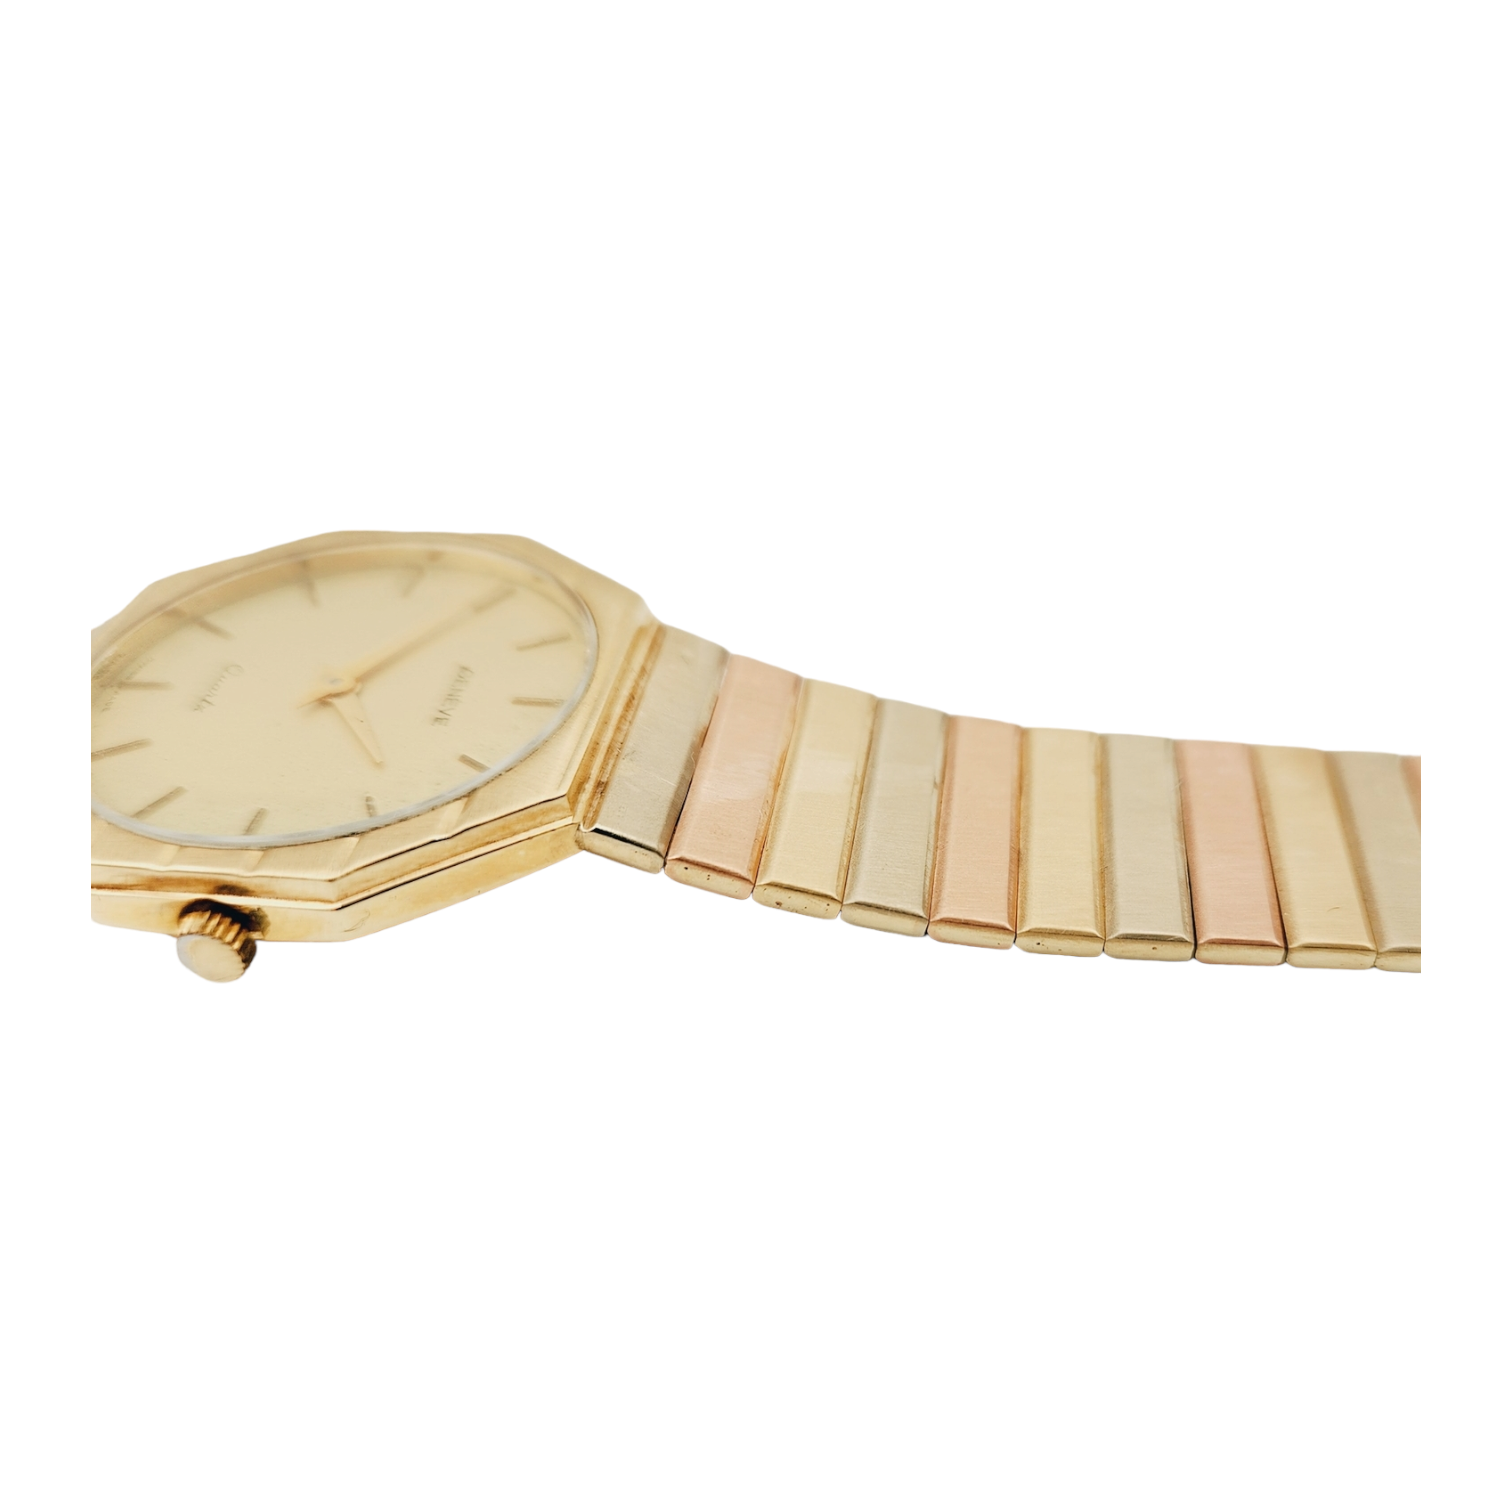 Unisex Geneve 32mm Vintage 14K Yellow Gold Watch with Gold Dial and Fluted Bezel. (Pre-Owned)